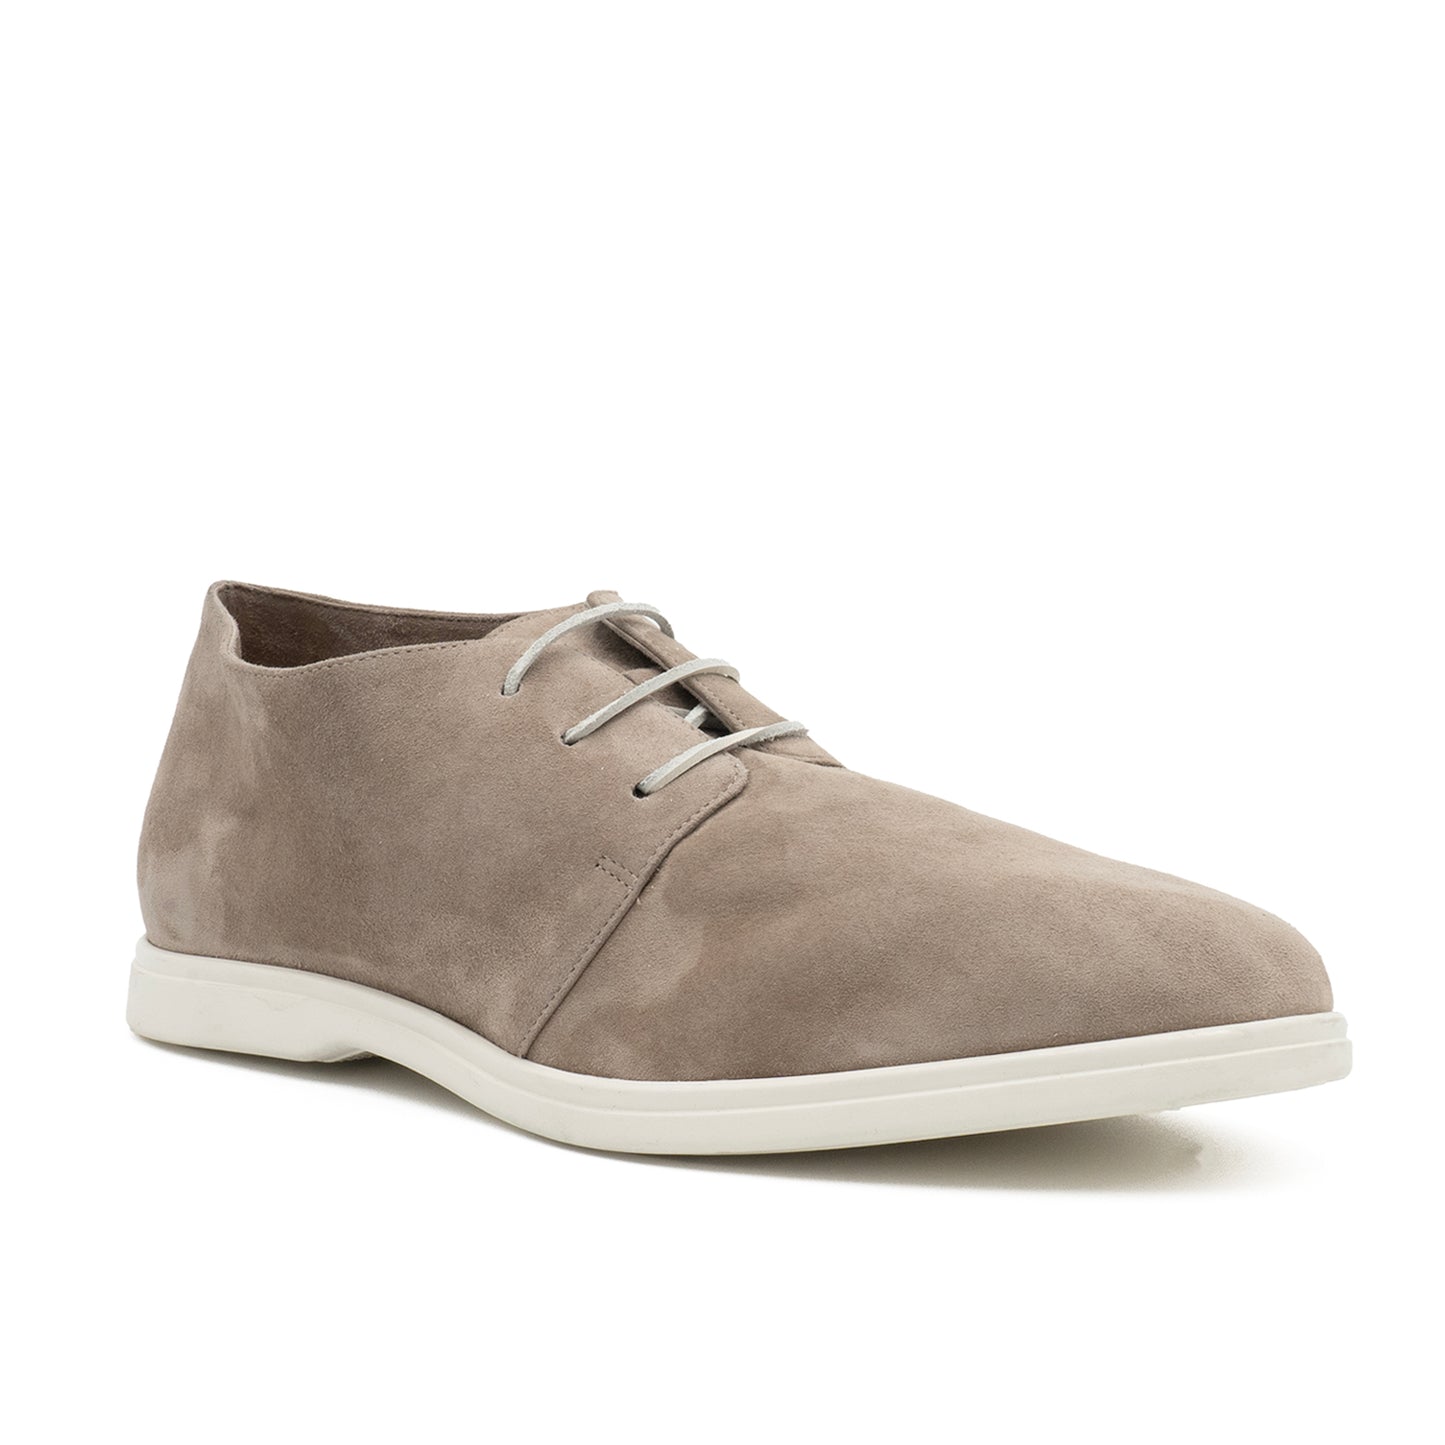 Remis Flat Tie Taupe Cashmere